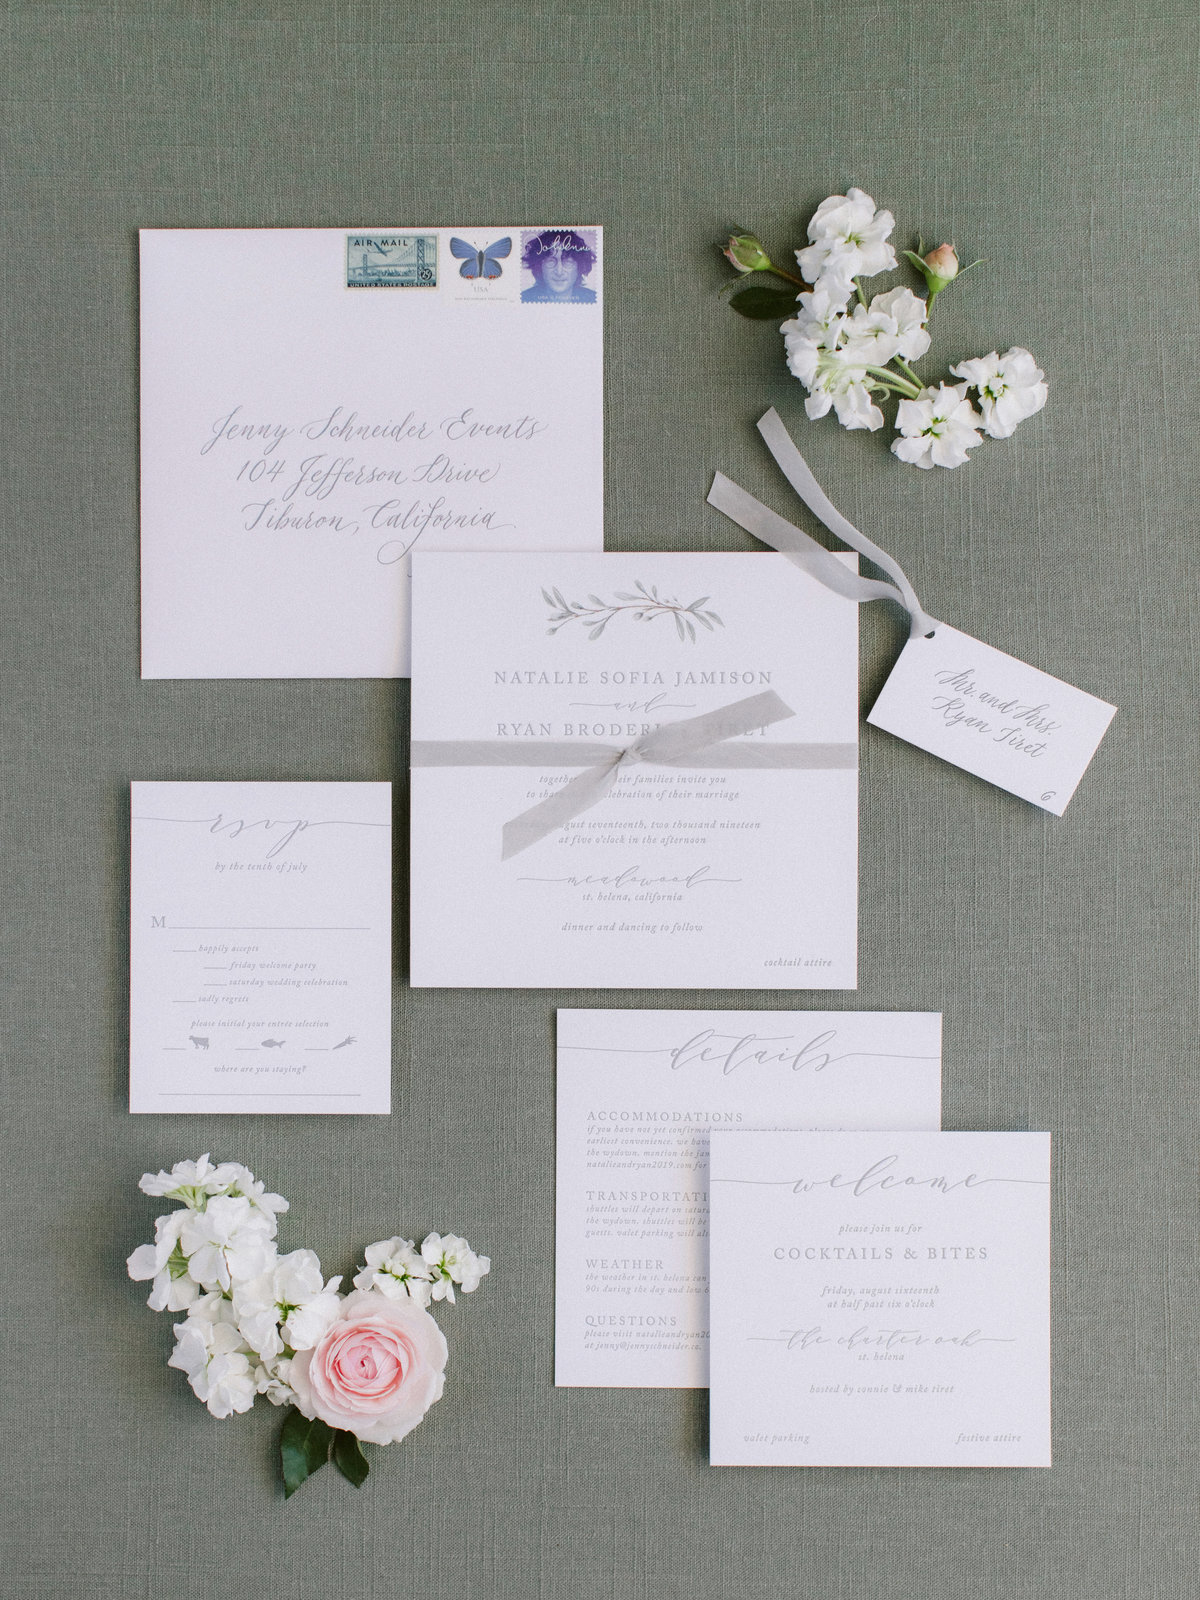 Invitation for wedding by Jenny Schneider Events at Meadowood luxury resort in Saint Helena in Napa Valley, California.